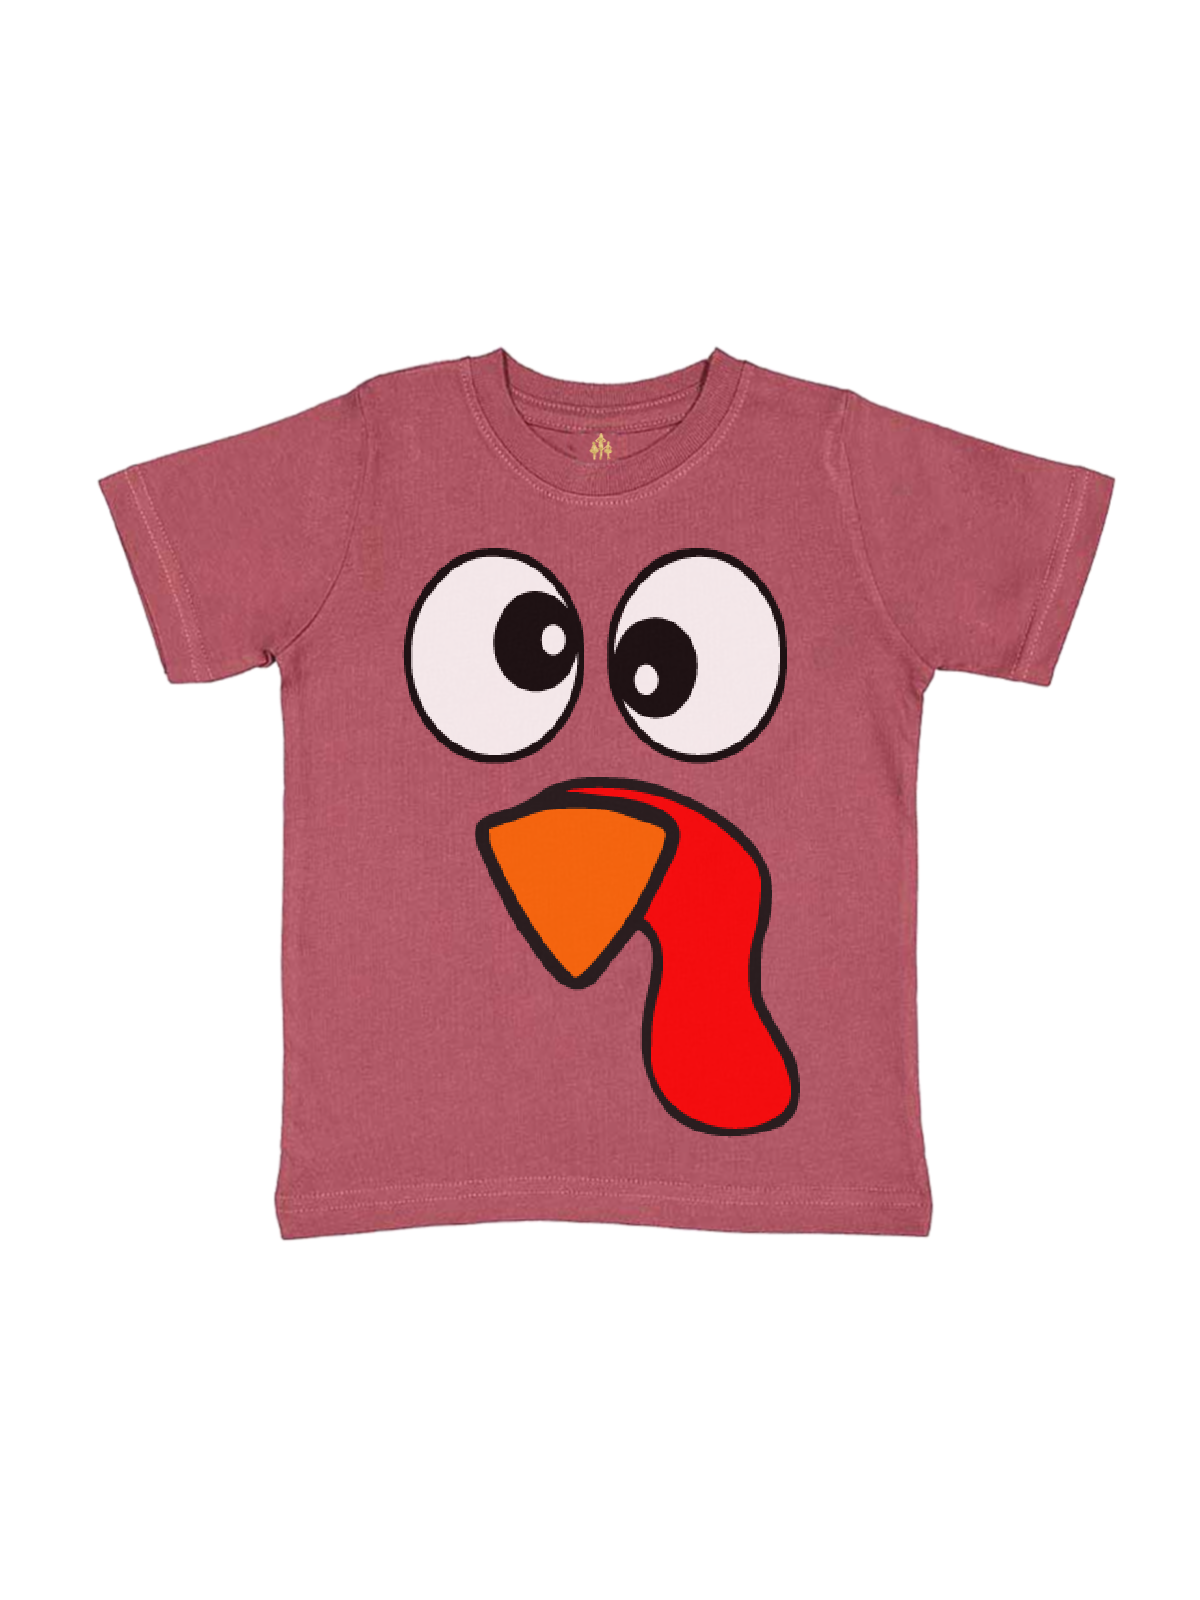 Silly Turkey Face Kids Thanksgiving Shirt in Rouge Red